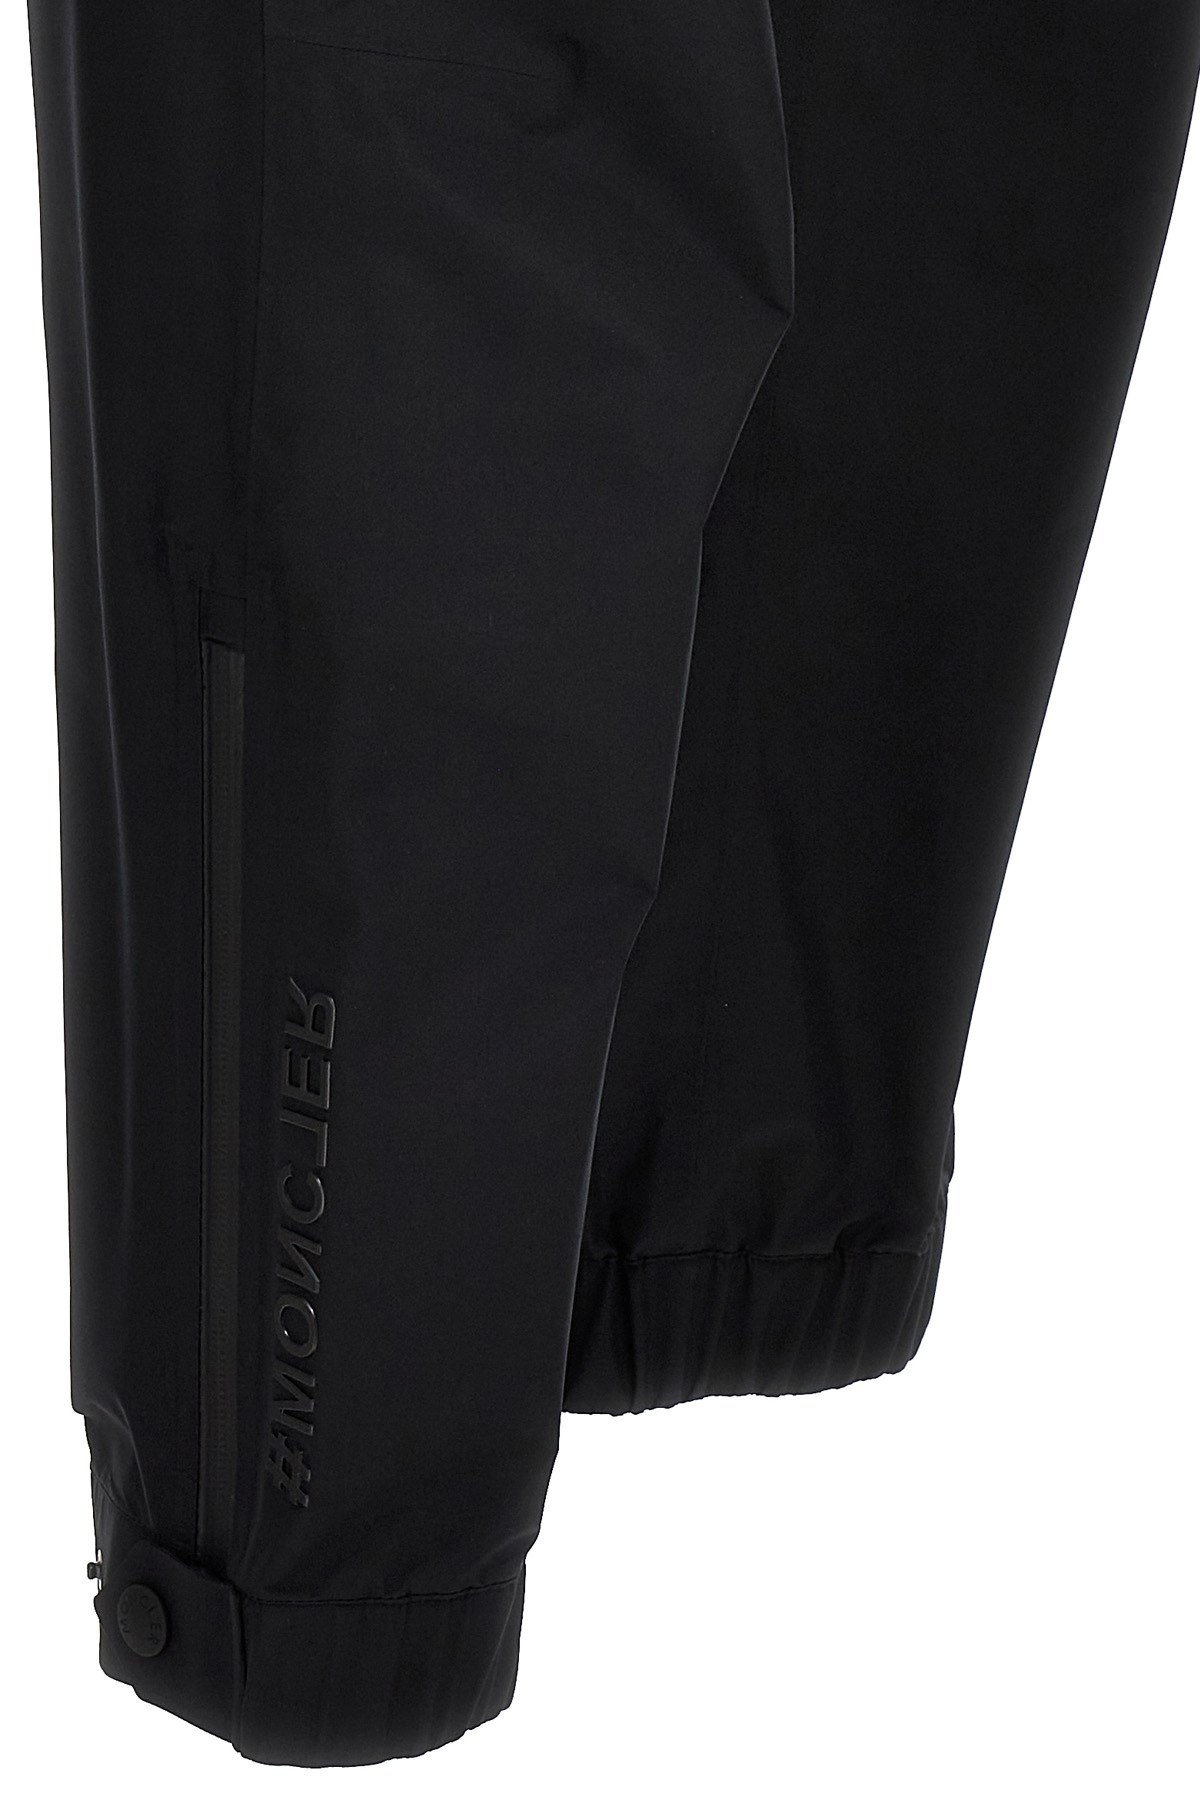 GORE-TEX trousers - 5